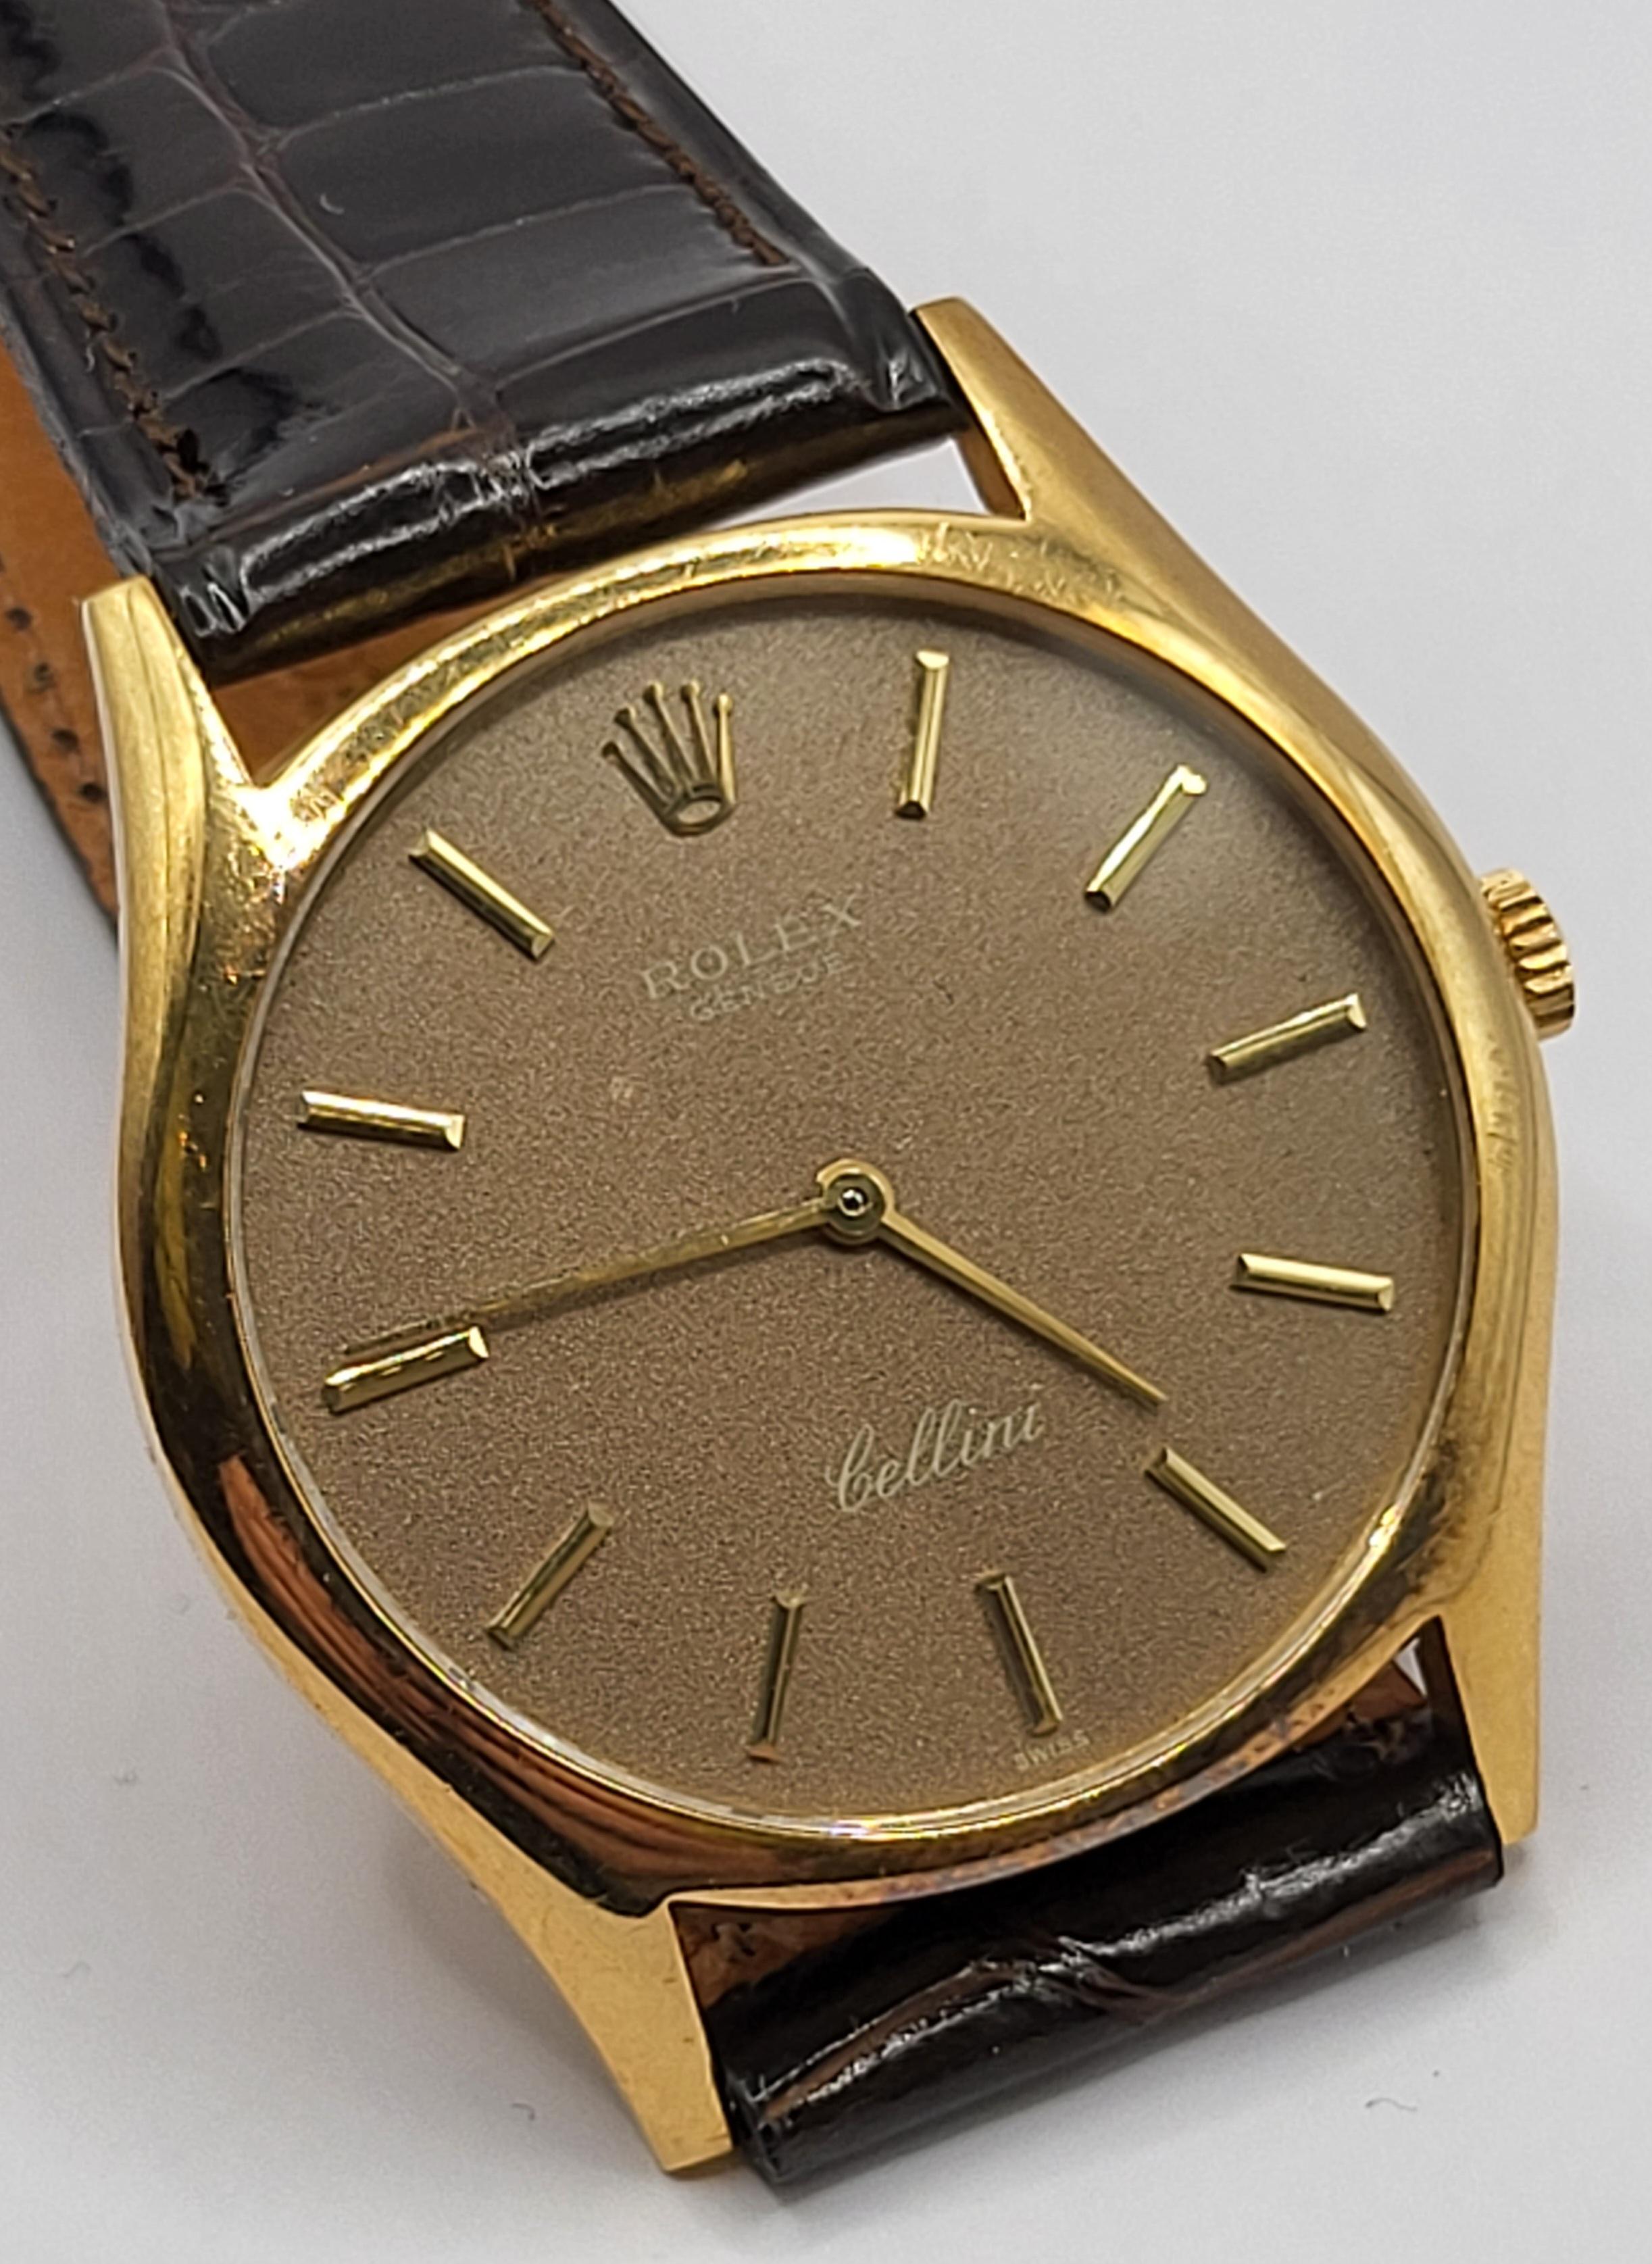 18 kt. Rolex Cellini Wrist Watch Ref 3904 Mechanical Manual Winding Caliber 1600 Collectors

Ref: 3904

Movement: Mechanical, Manual Movement, Cal. 1600

Functions: Hours, minutes

Case : 18 kt. gold, Diameter 31.5 mm x Thickness 5.2 mm 

Dial: Gold